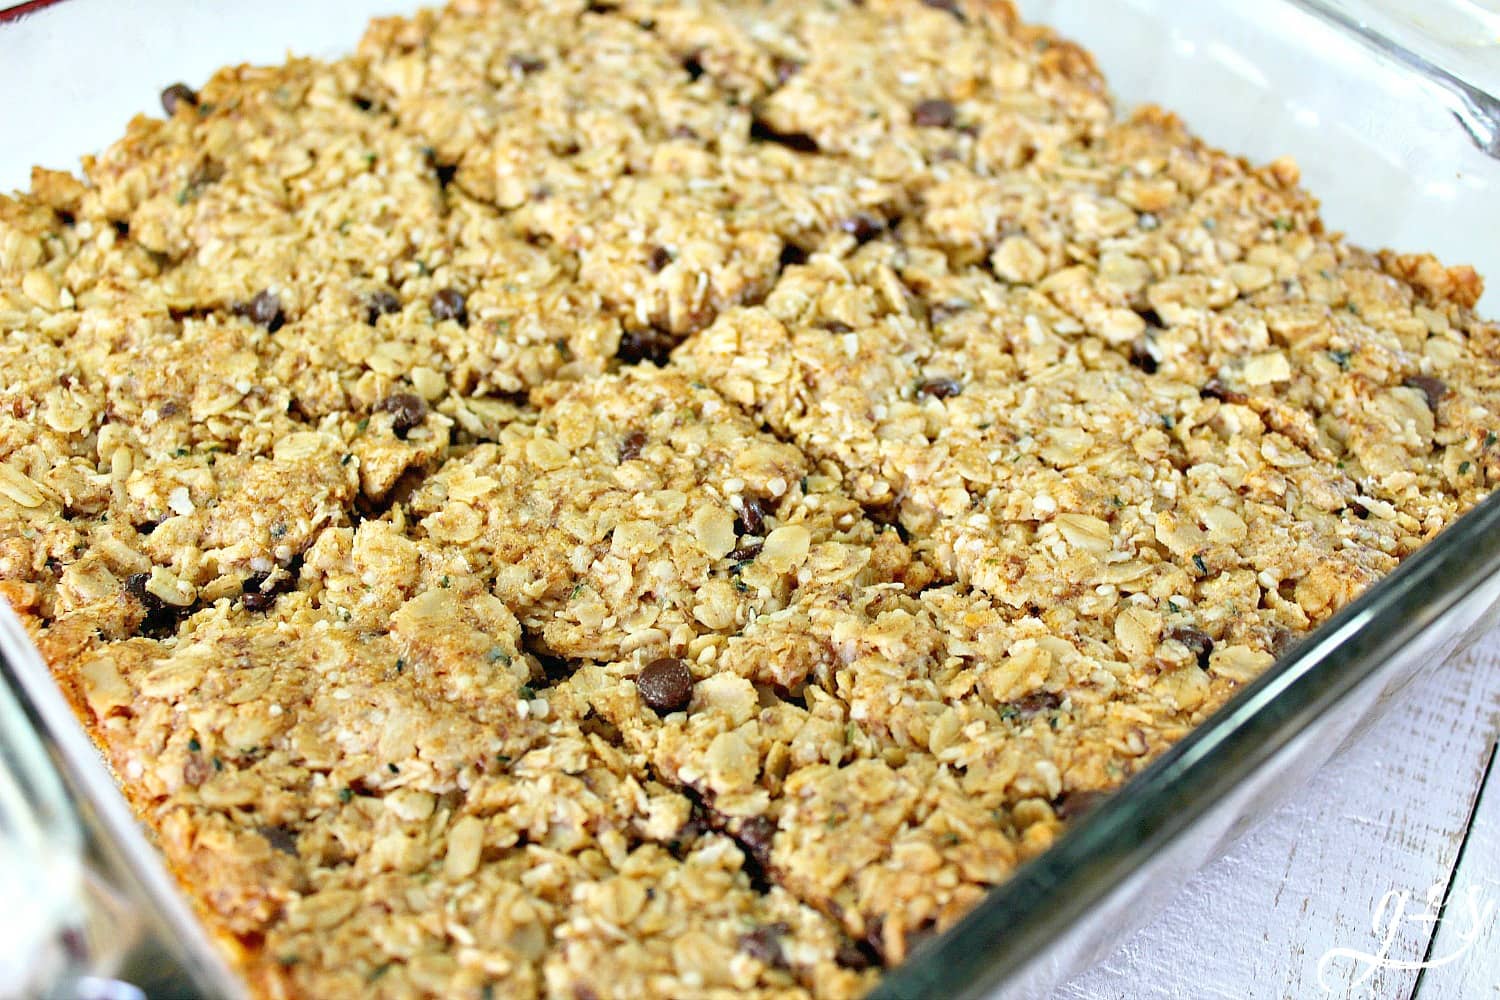 These Fit & Frugal Granola Bars are made with healthy gluten free ingredients to create chewy granola bars you feel good about feeding your kids. This homemade recipe is a perfect snack or addition to any school lunch. They are packed with superfoods like ground flax seeds, hemp seeds and coconut! But any add-ins will work! We never skip the chocolate chips but the possibilities are endless. Look no further, you have found the BEST granola bar recipe on Pinterest!